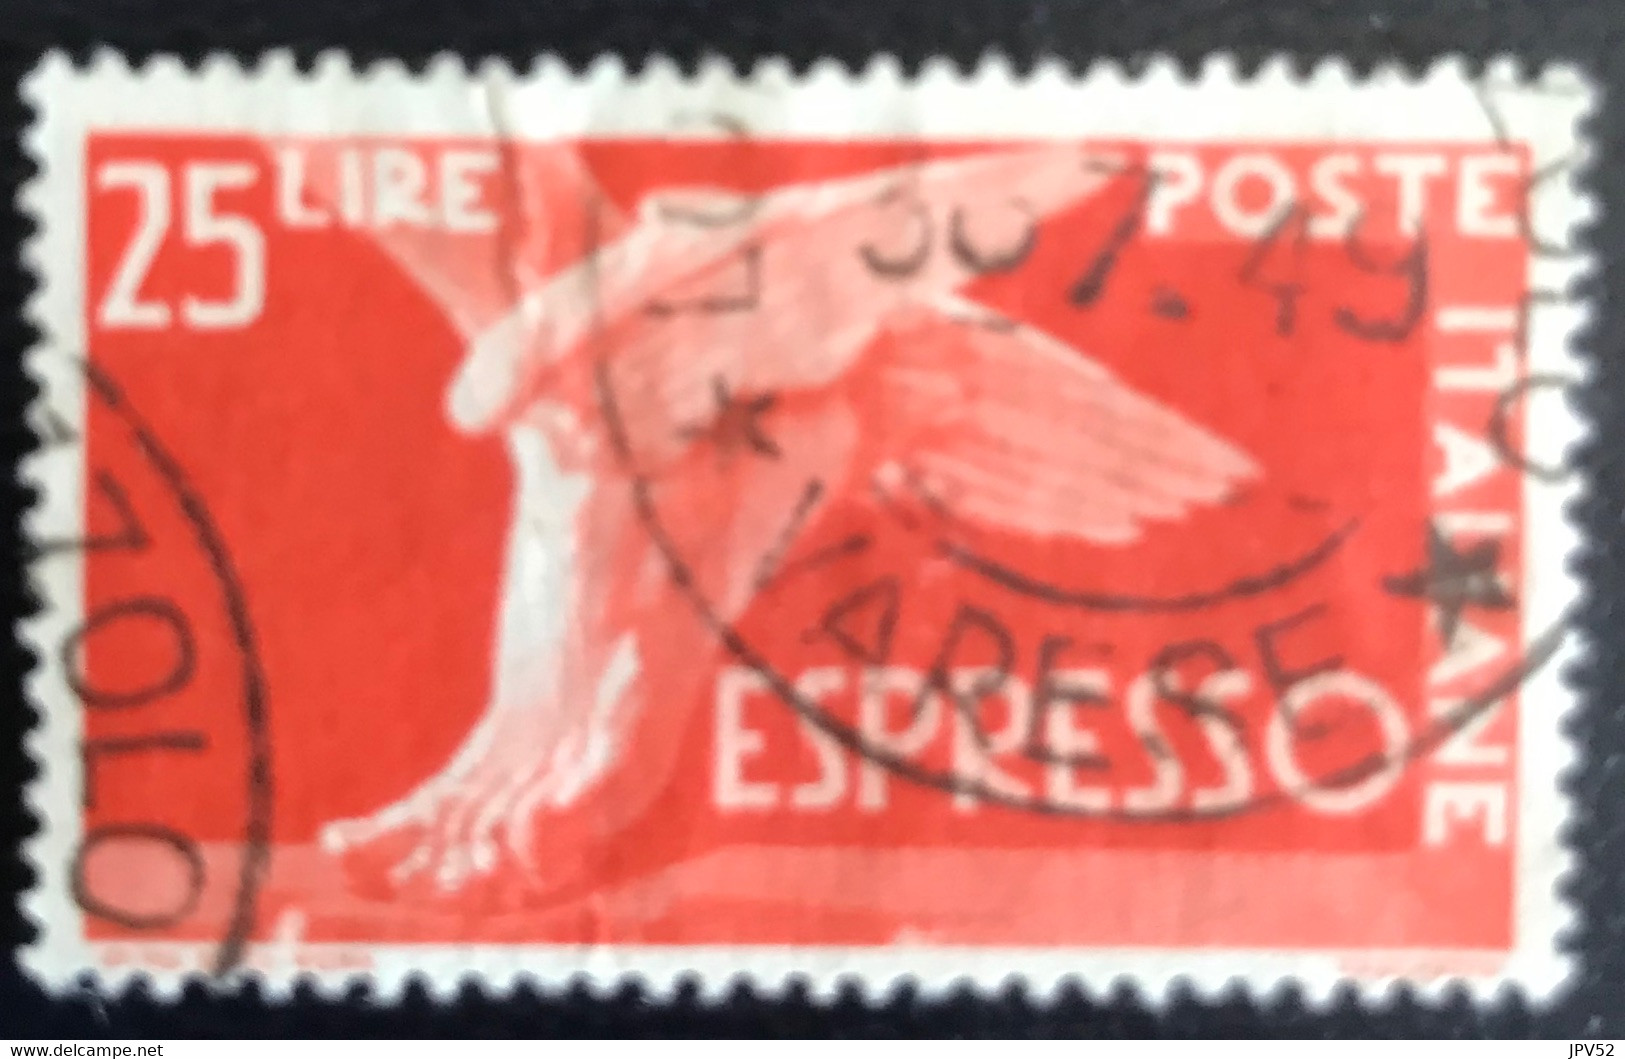 Italia - Italy - T2/13 - (°)used - 1945 - Michel 718 - Expresso - Express Mail